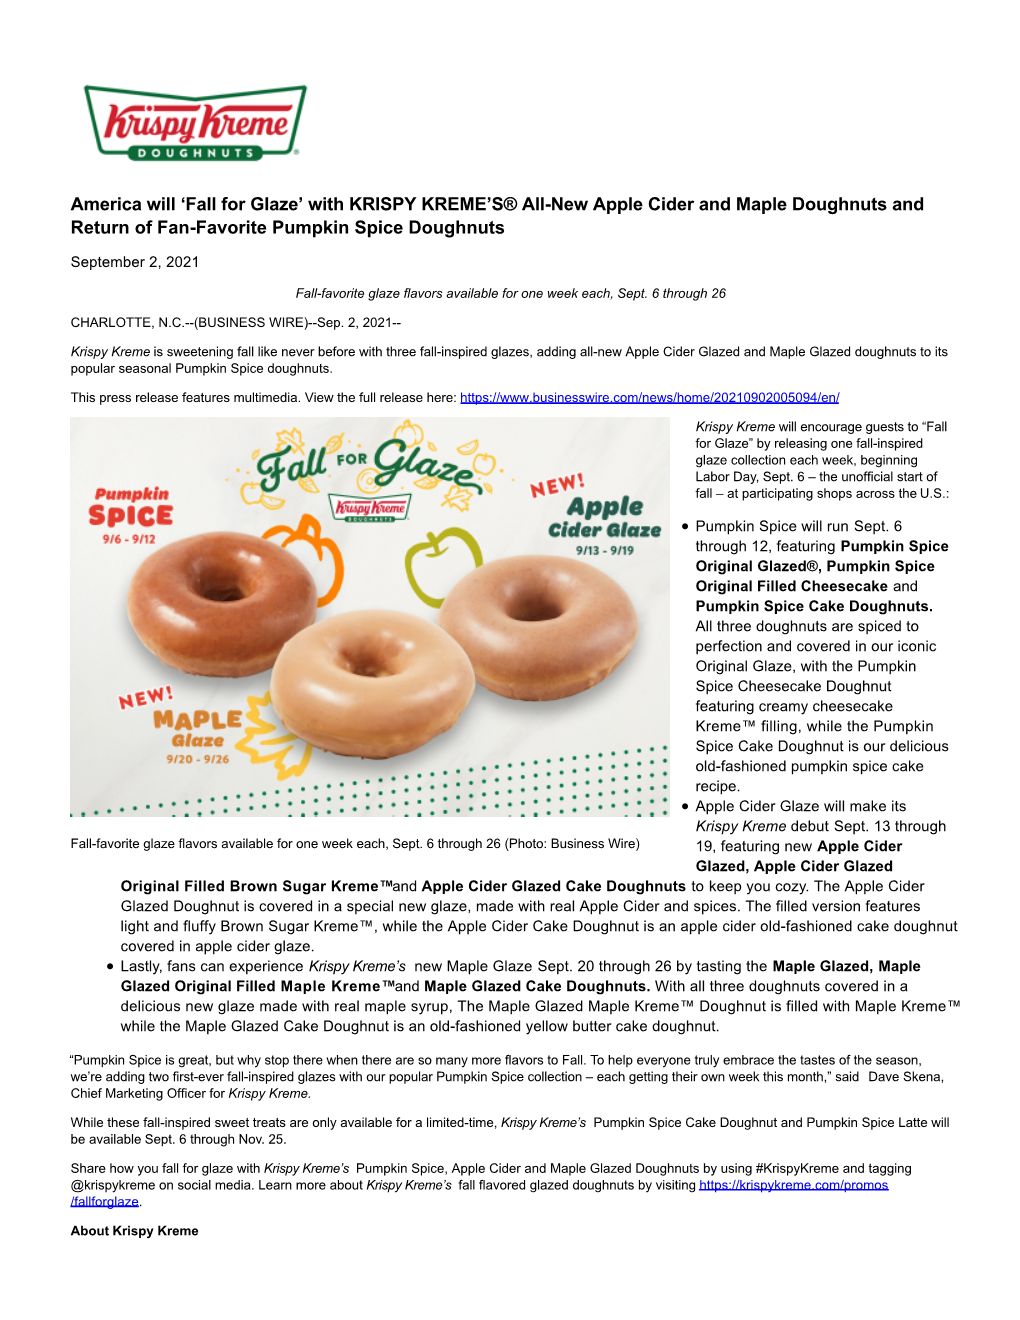 'Fall for Glaze' with KRISPY KREME's® All-New Apple Cider and Maple